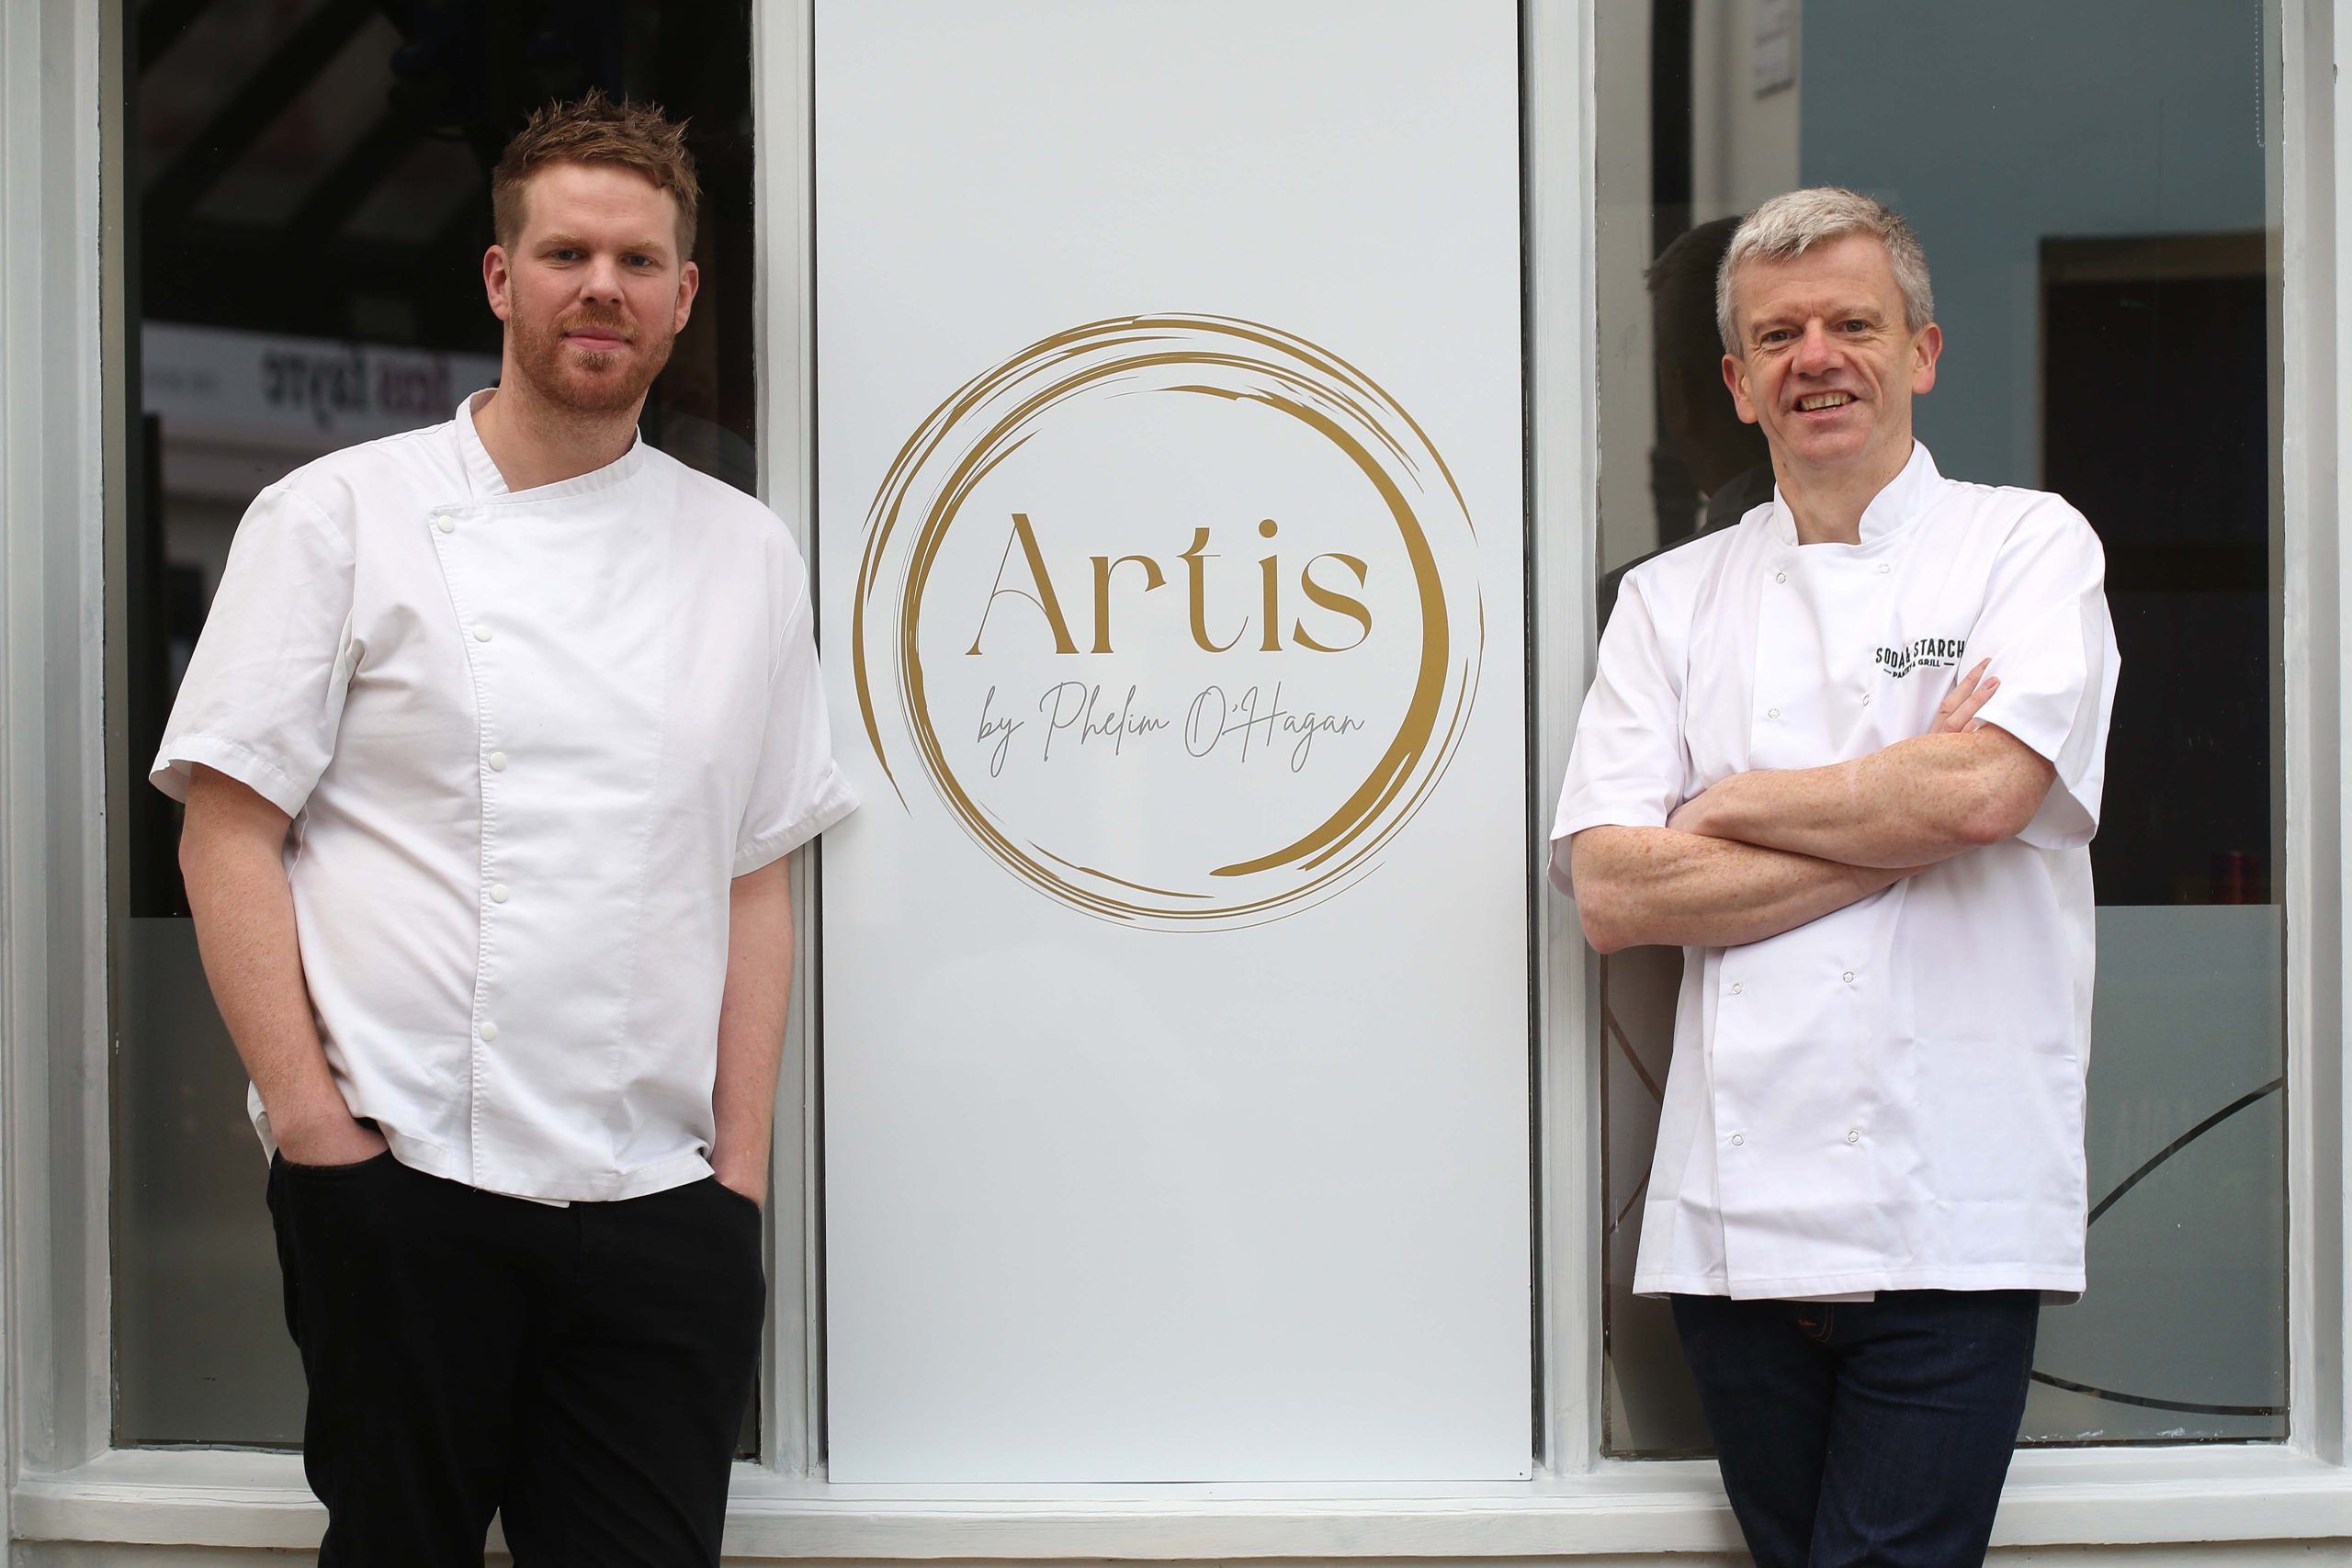 Artis a culinary Christmas present for North West